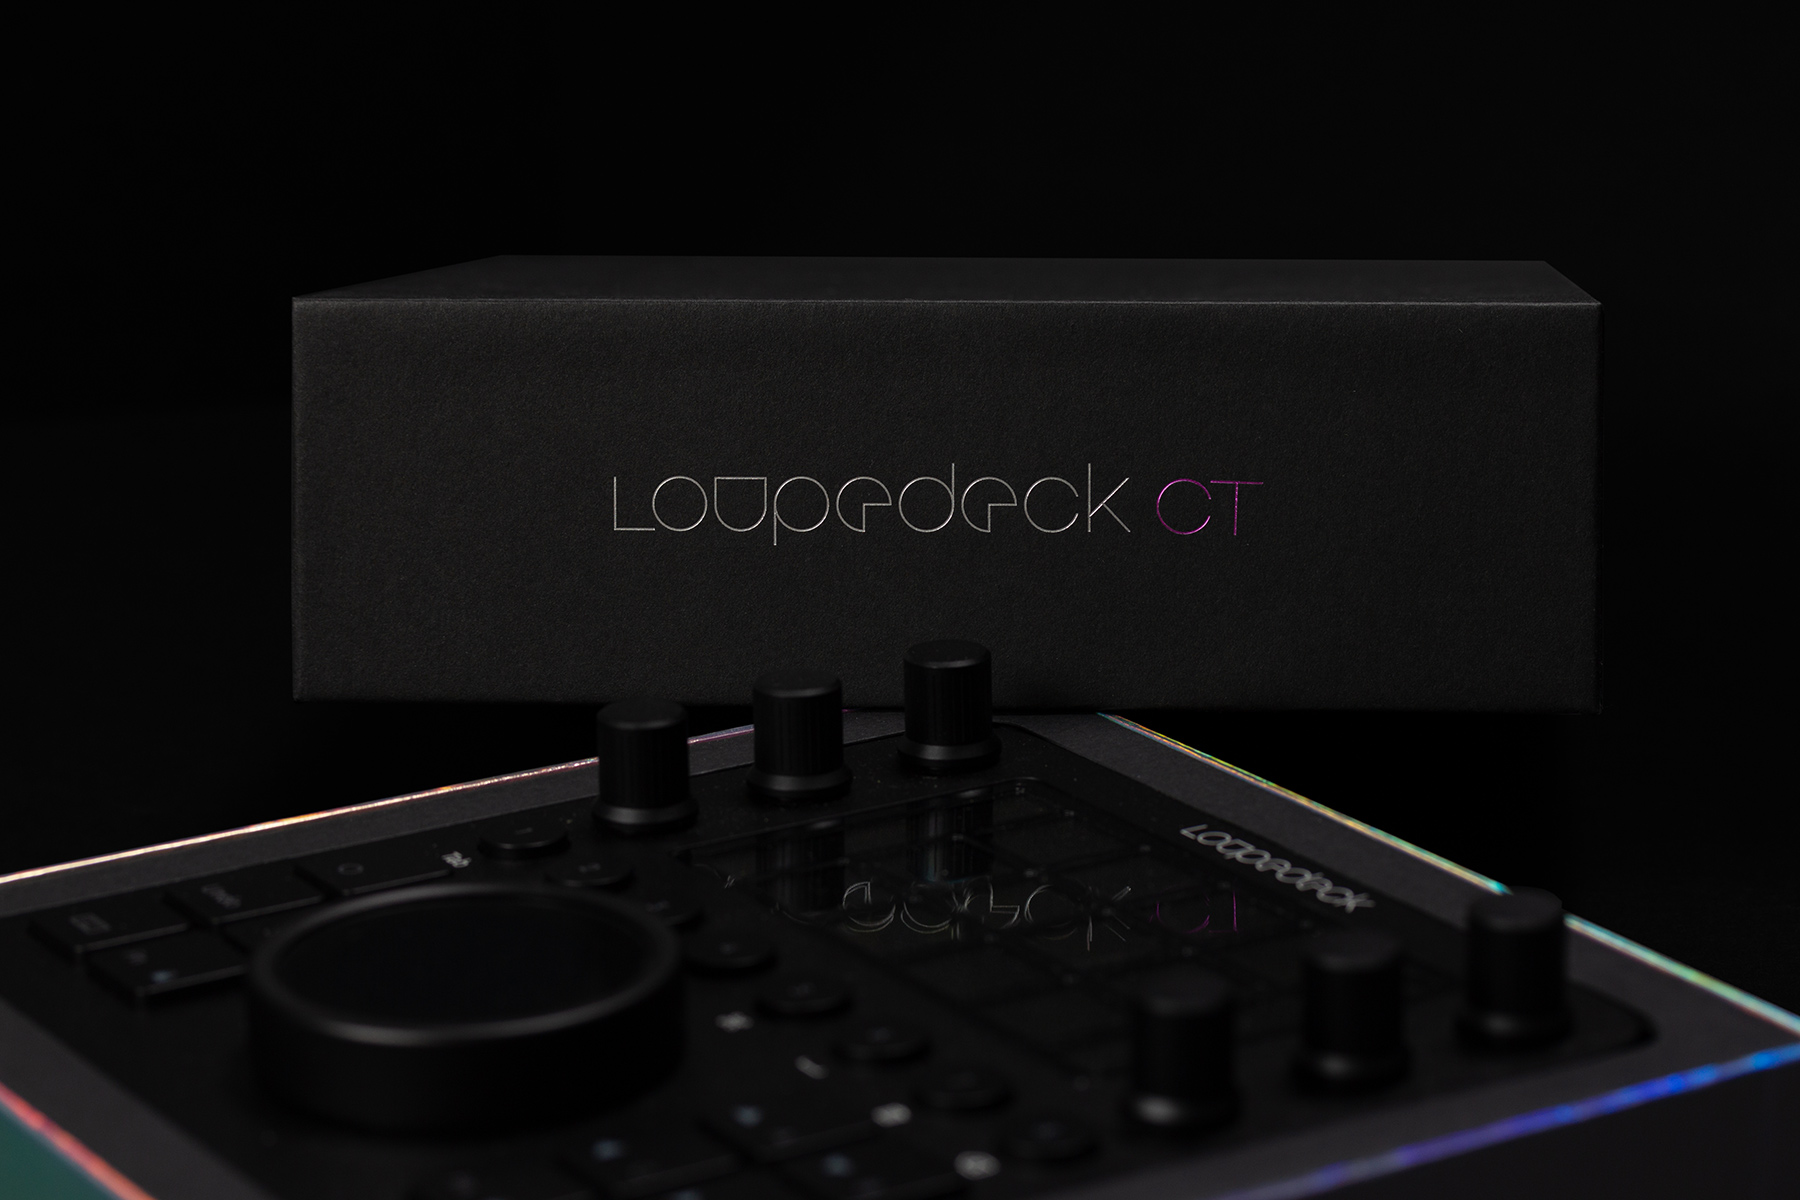 Loupdeck CT packaging design